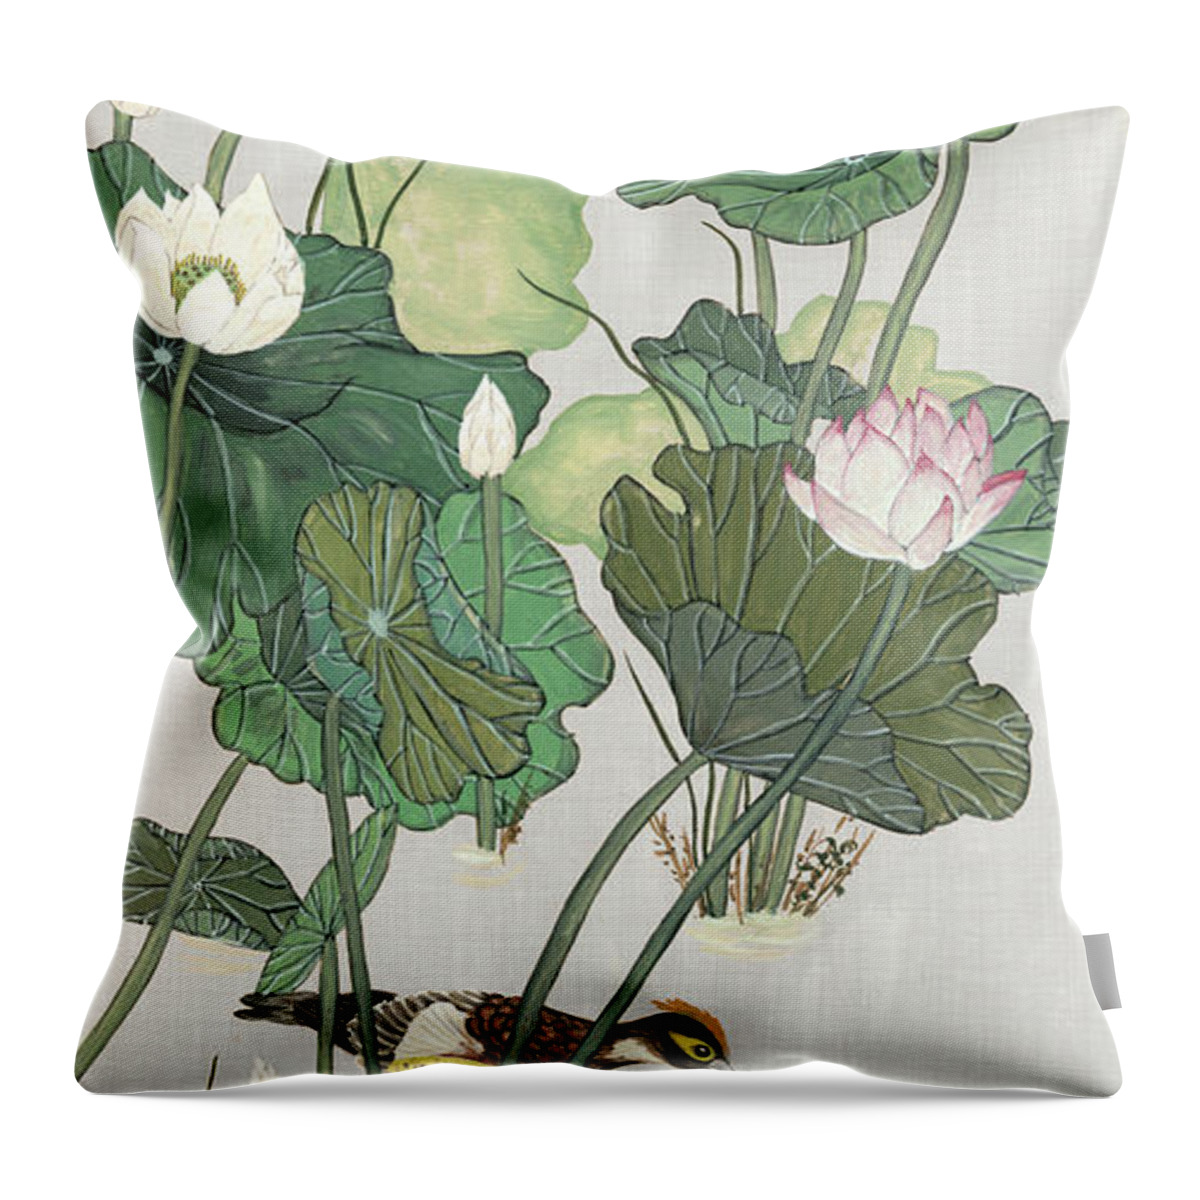 Asian Throw Pillow featuring the painting Lotus Pond I by Melissa Wang